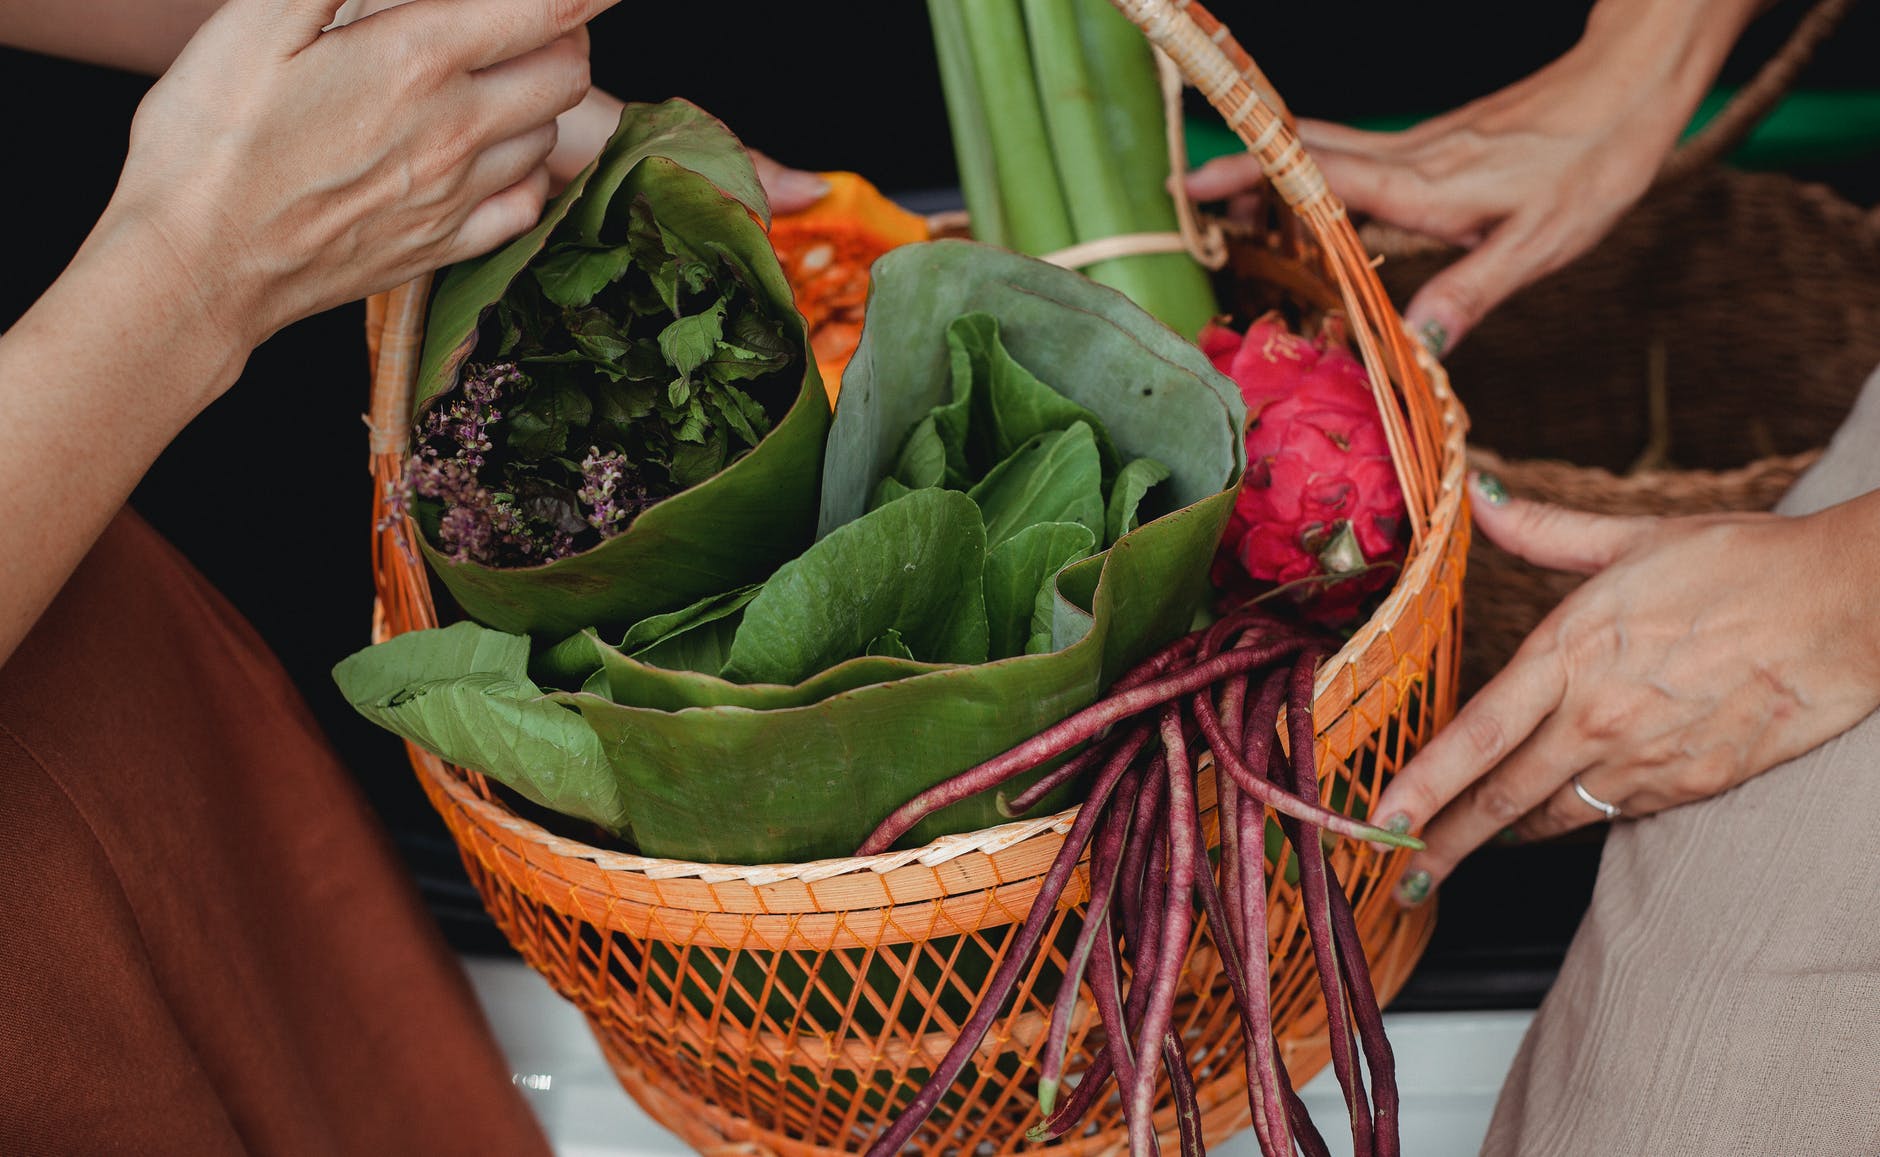 crop women showing basket with green vegetables and herbs